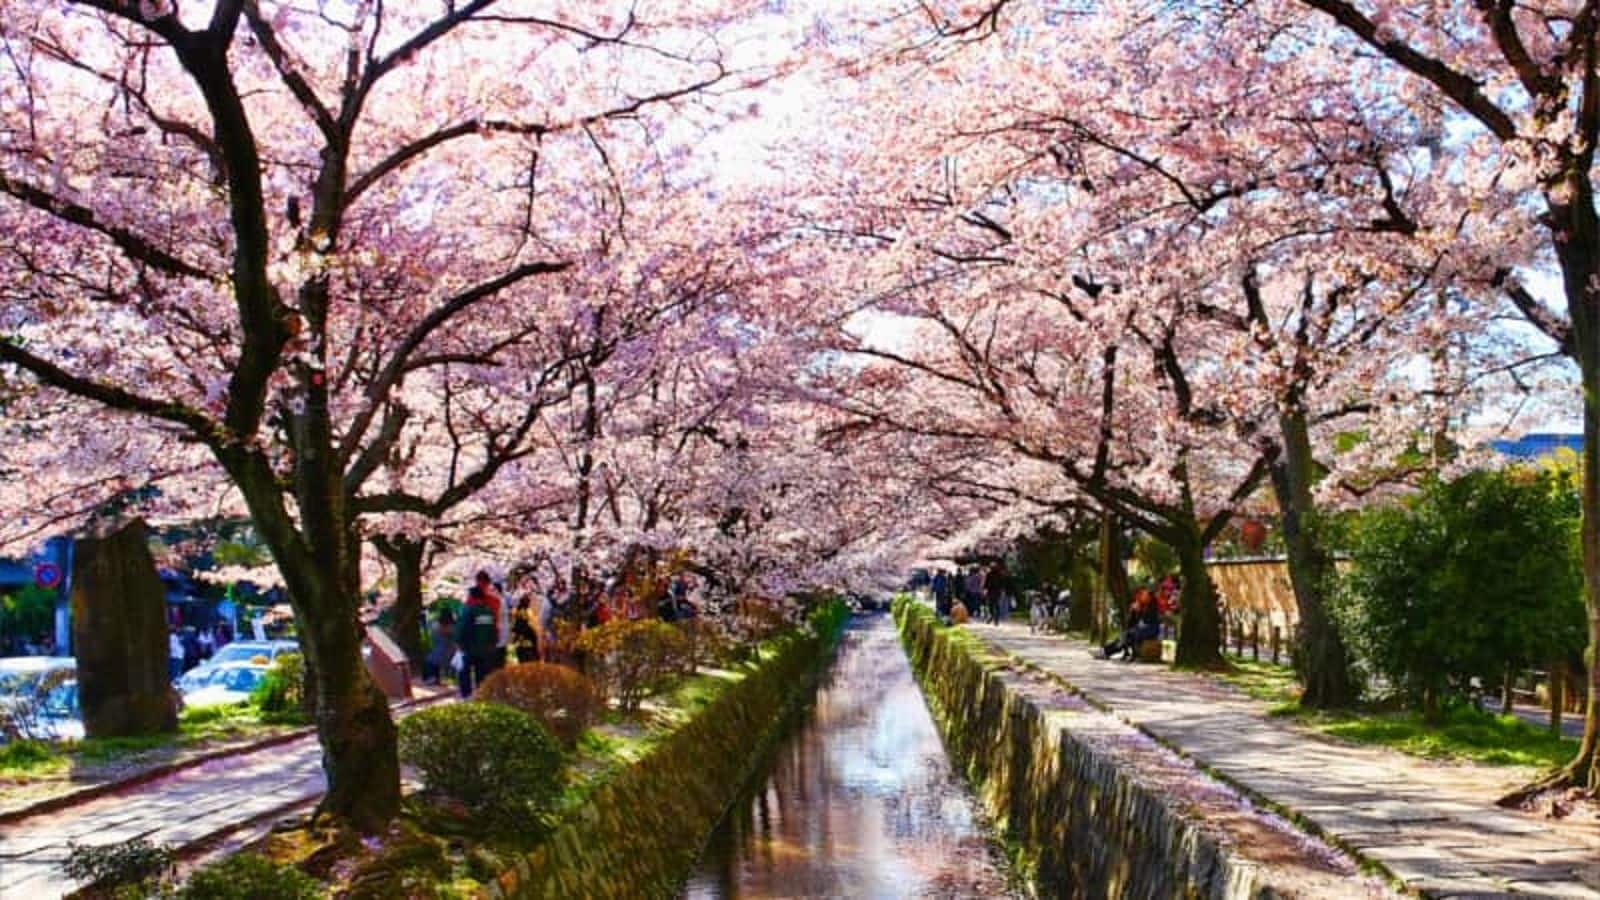 Japan is perfect to witness stunning cherry blossom trails